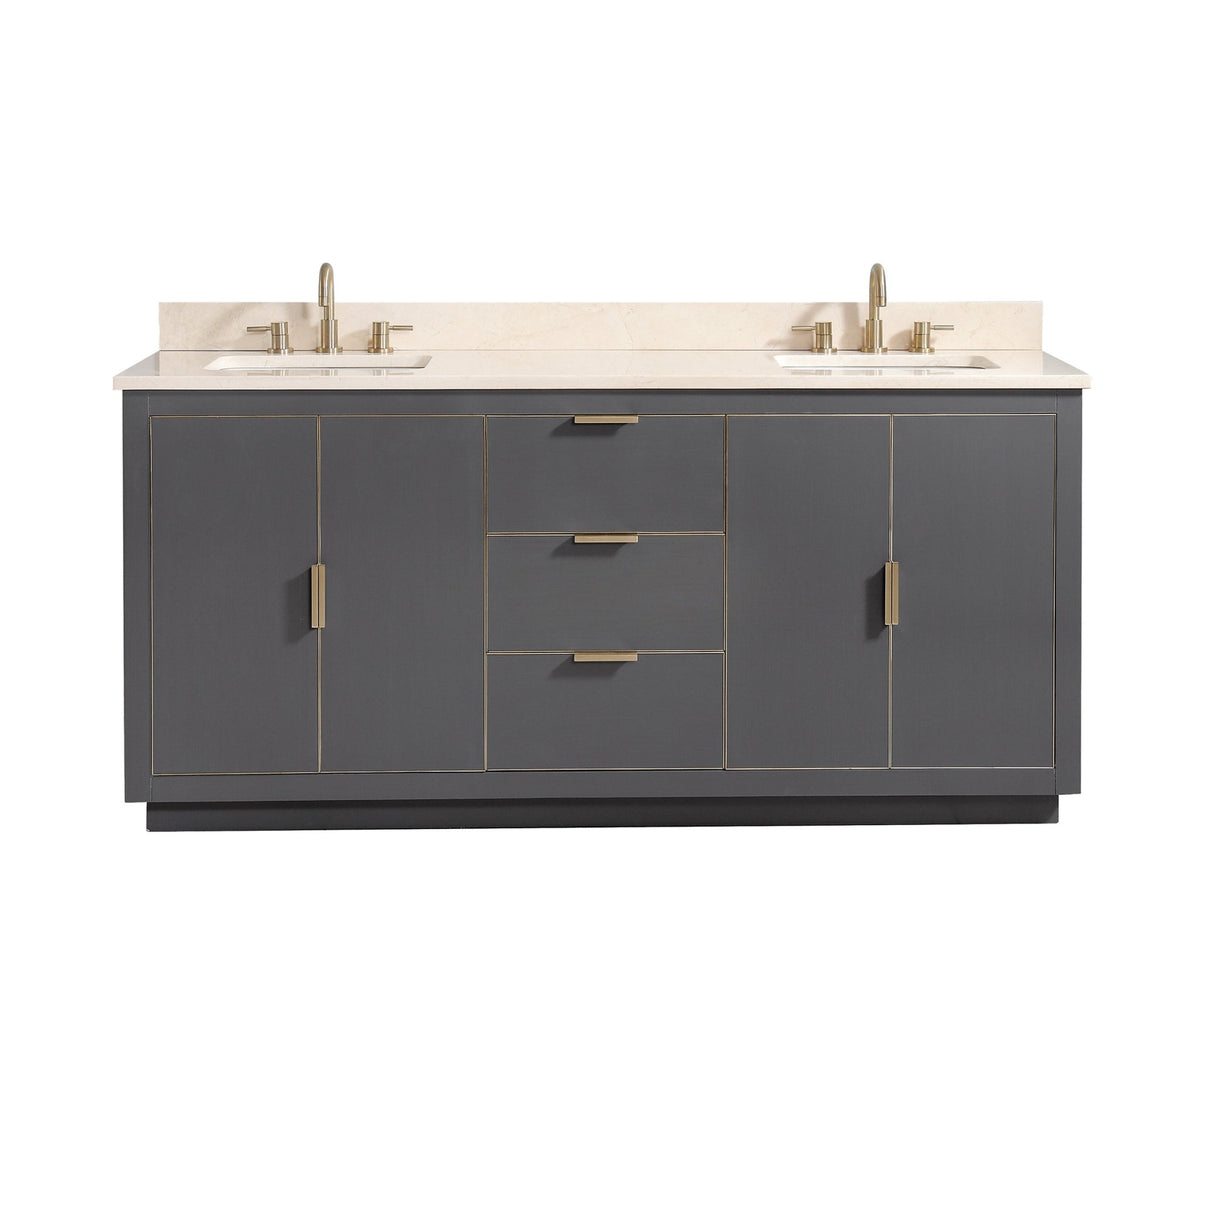 Avanity Austen 73 in. Vanity Combo in Twilight Gray with Gold Trim and Crema Marfil Marble Top